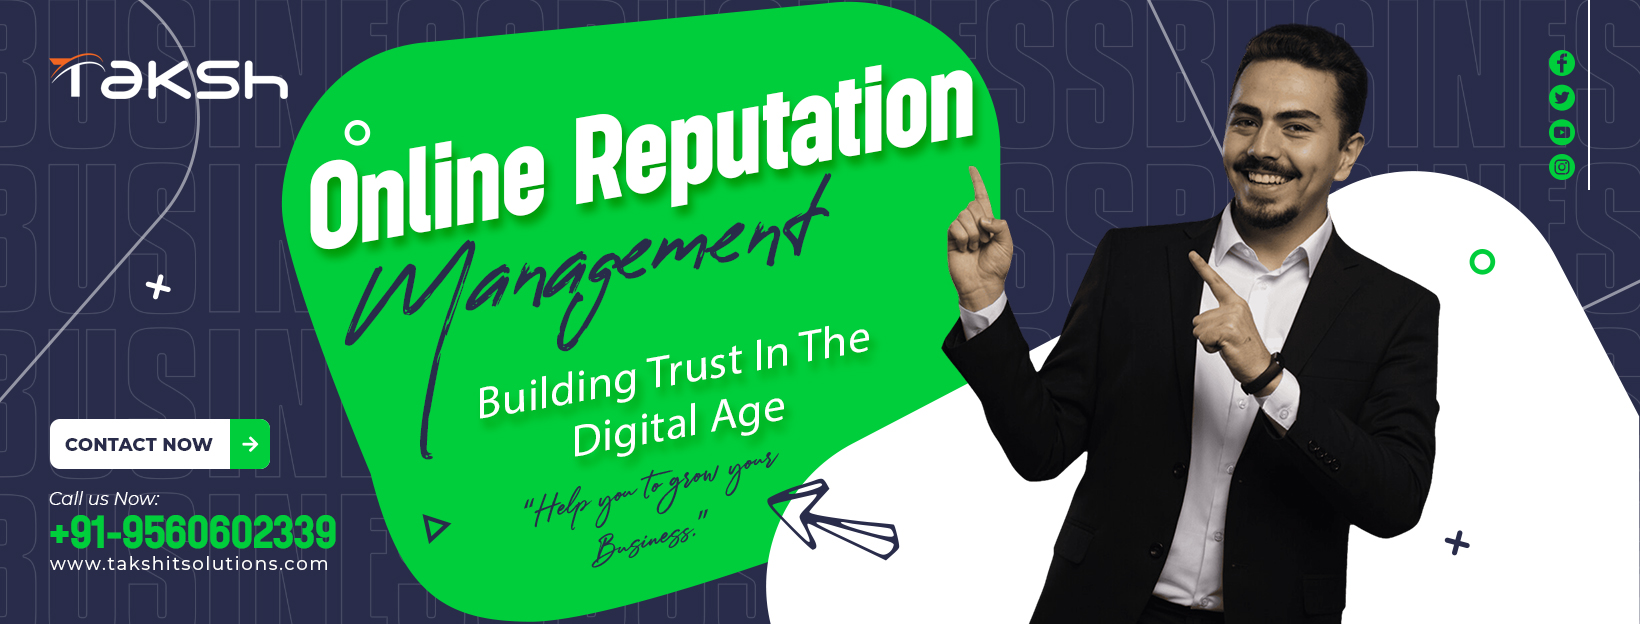 Online Reputation Management: Building Trust In The Digital Age